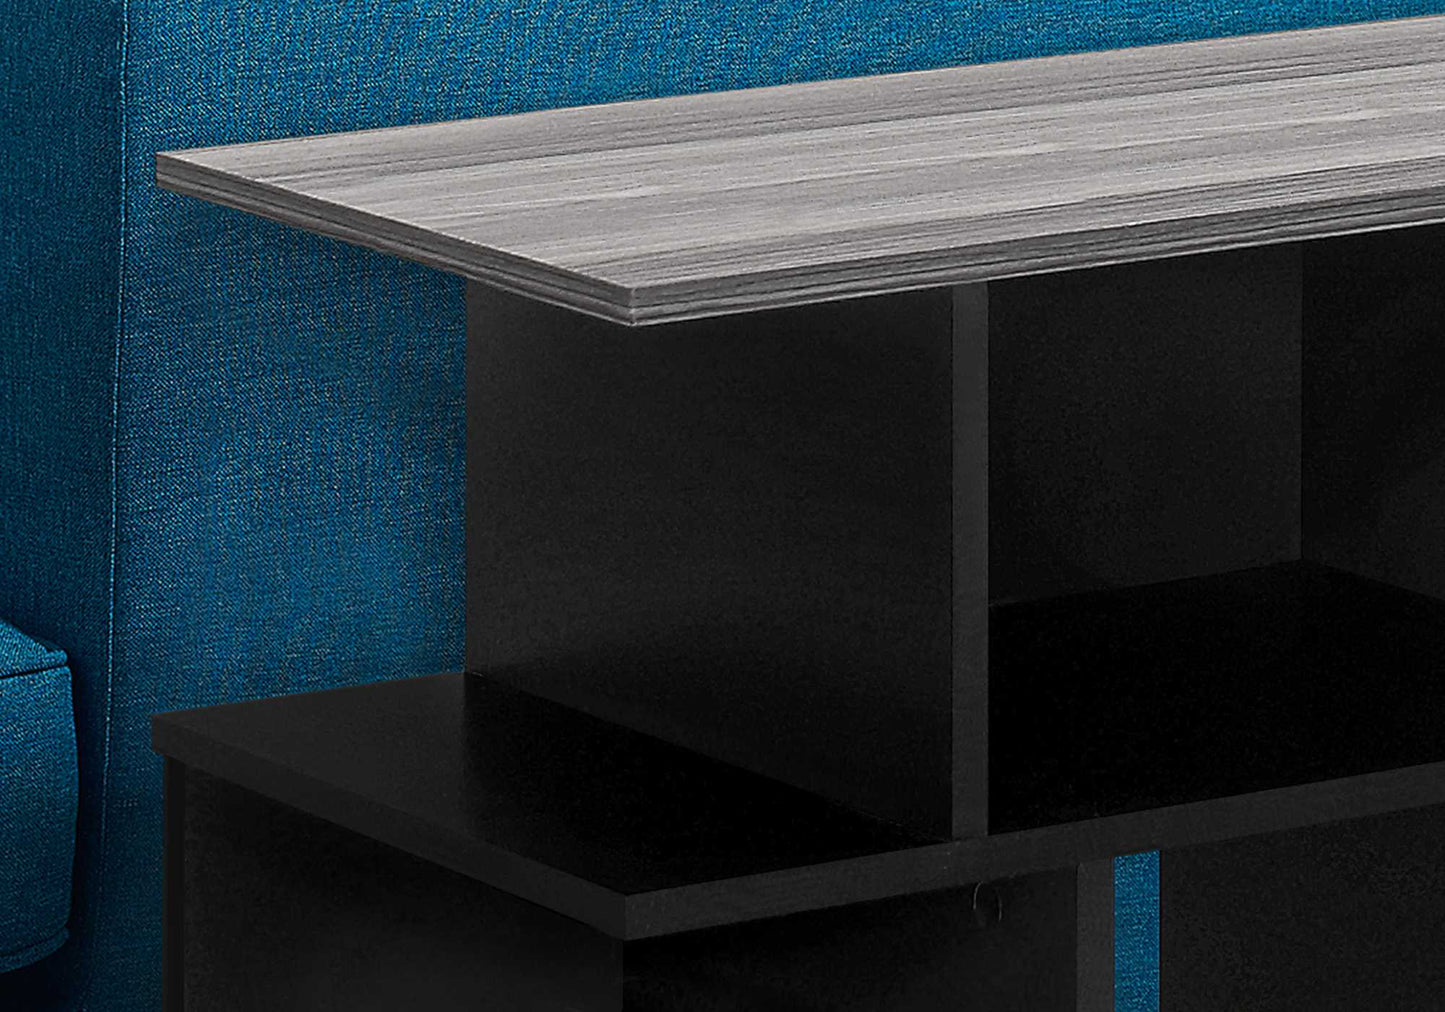 HomeRoots 11.75" x 23.75" x 23.75" Particle Board Laminate Accent Table With Black and Grey Finish